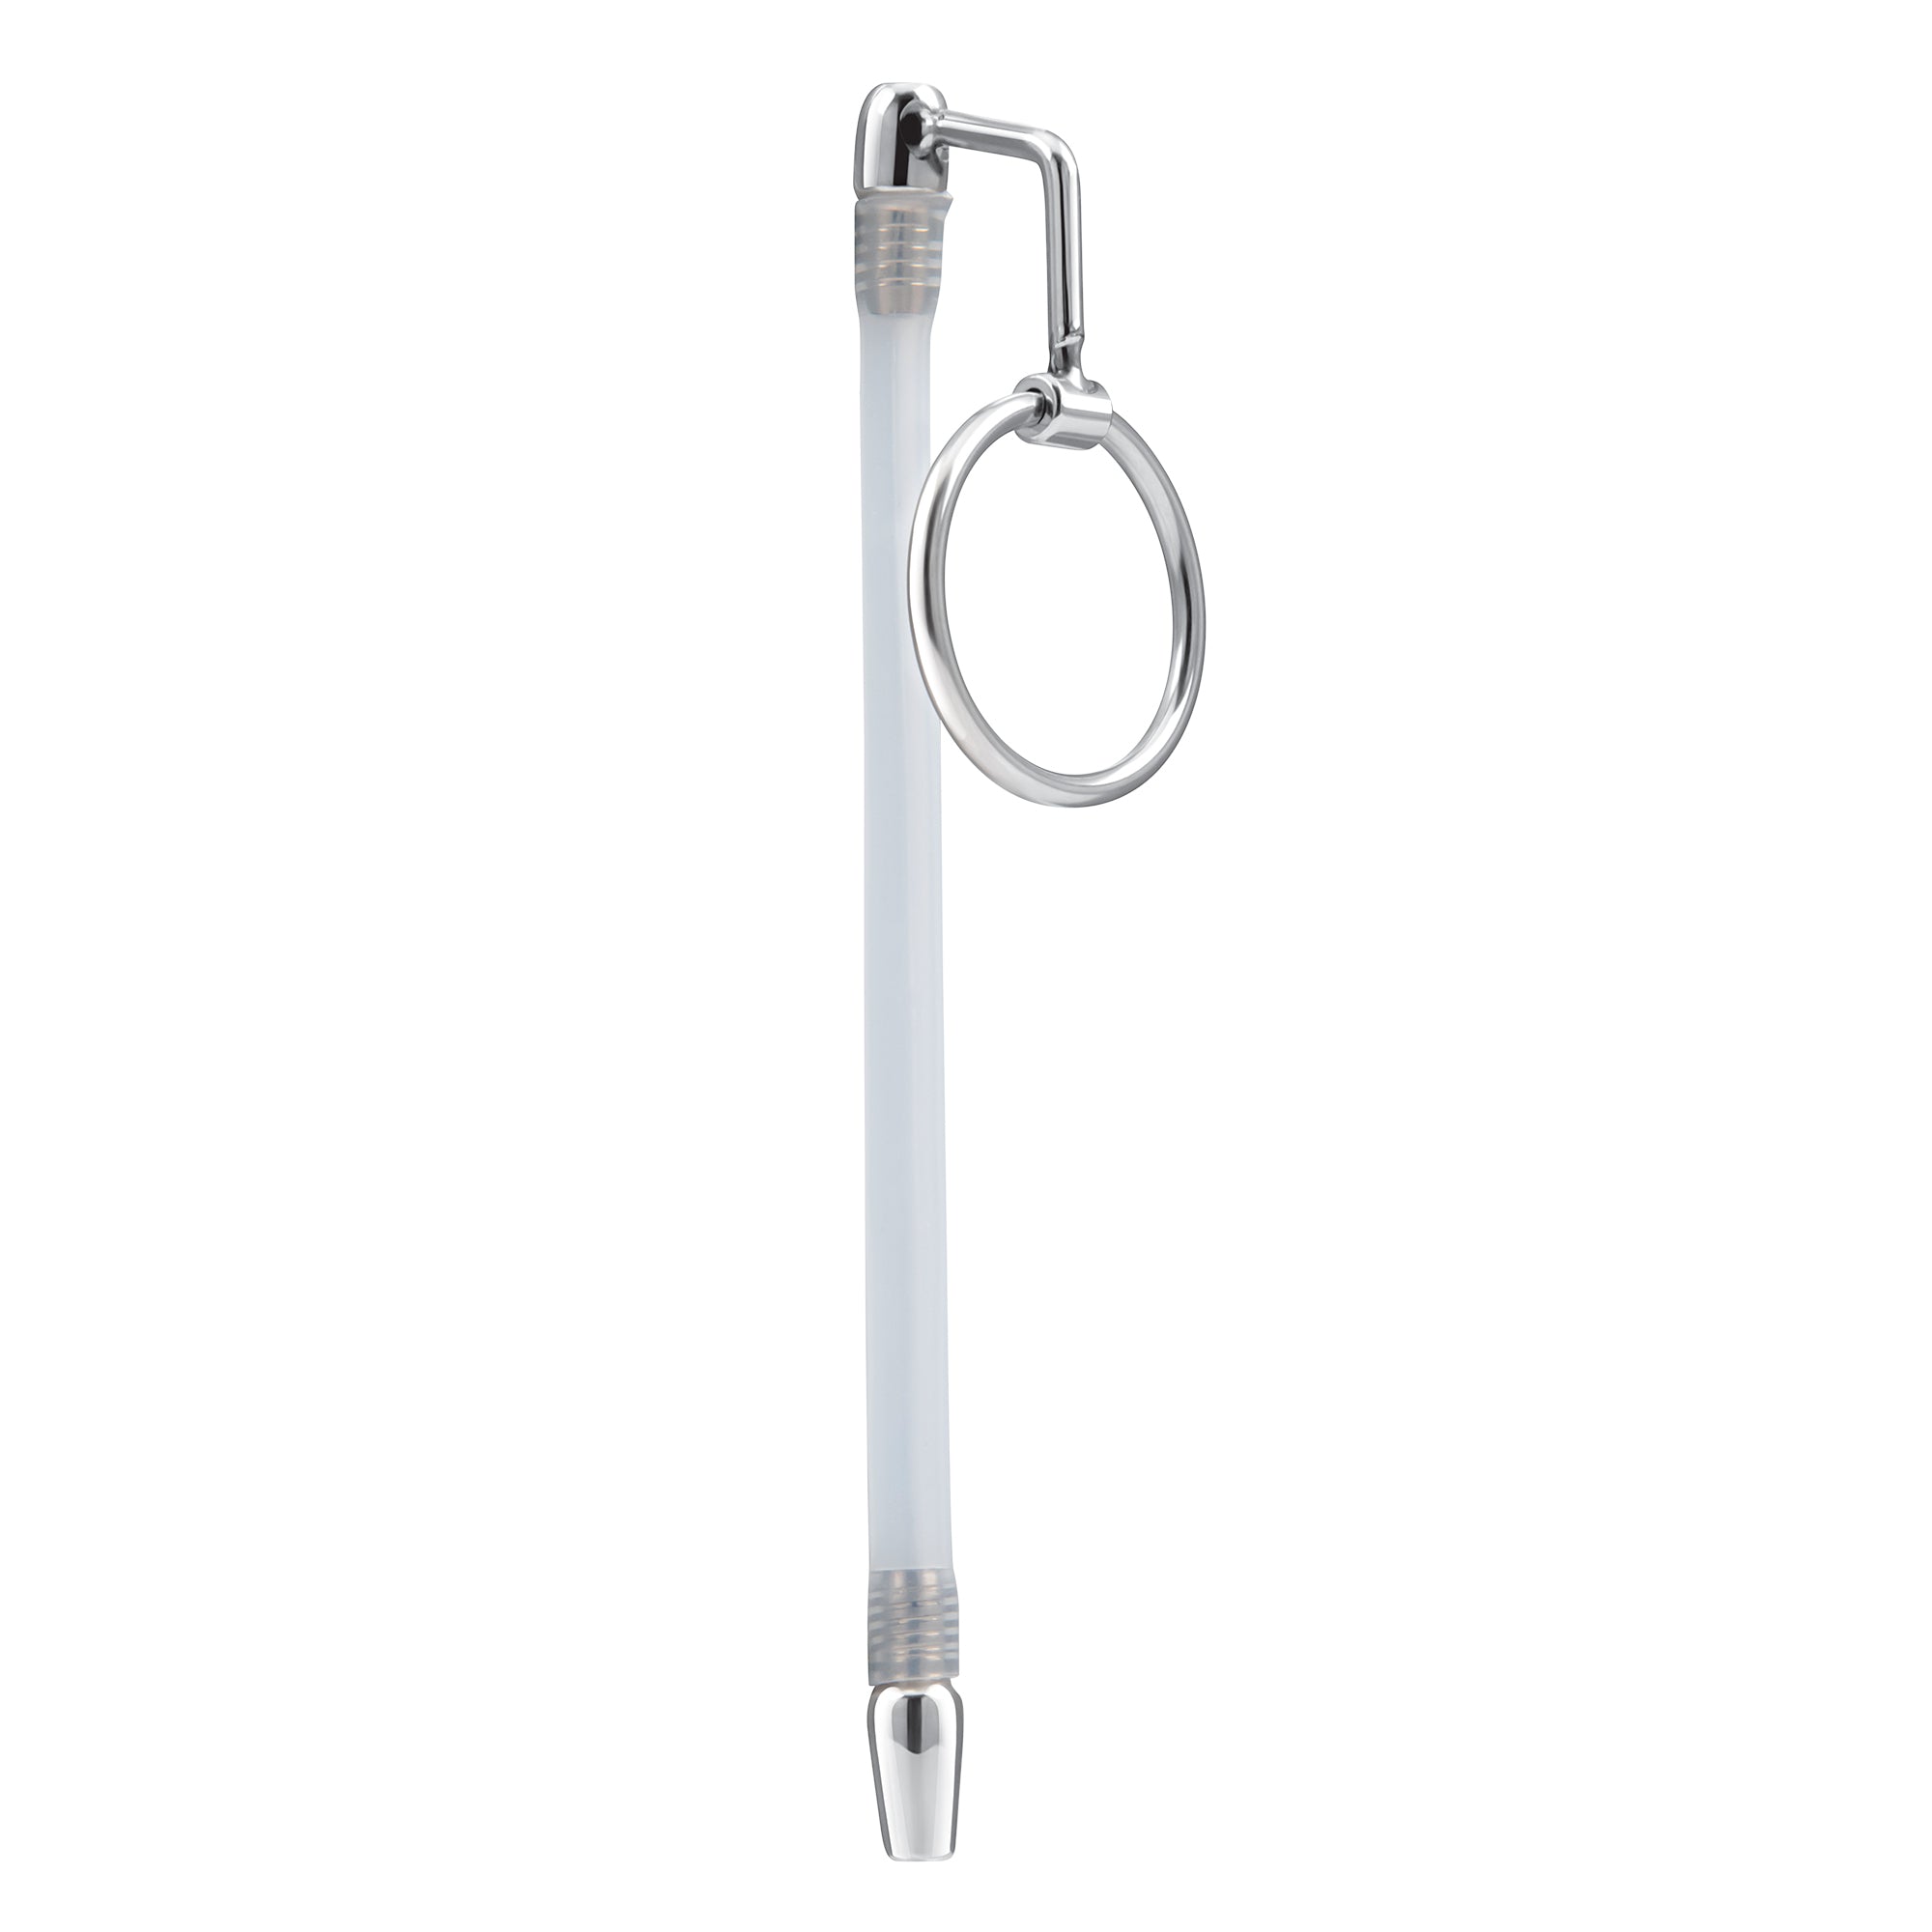 Stainless Steel Cock Ring Catheter Urethral Plug